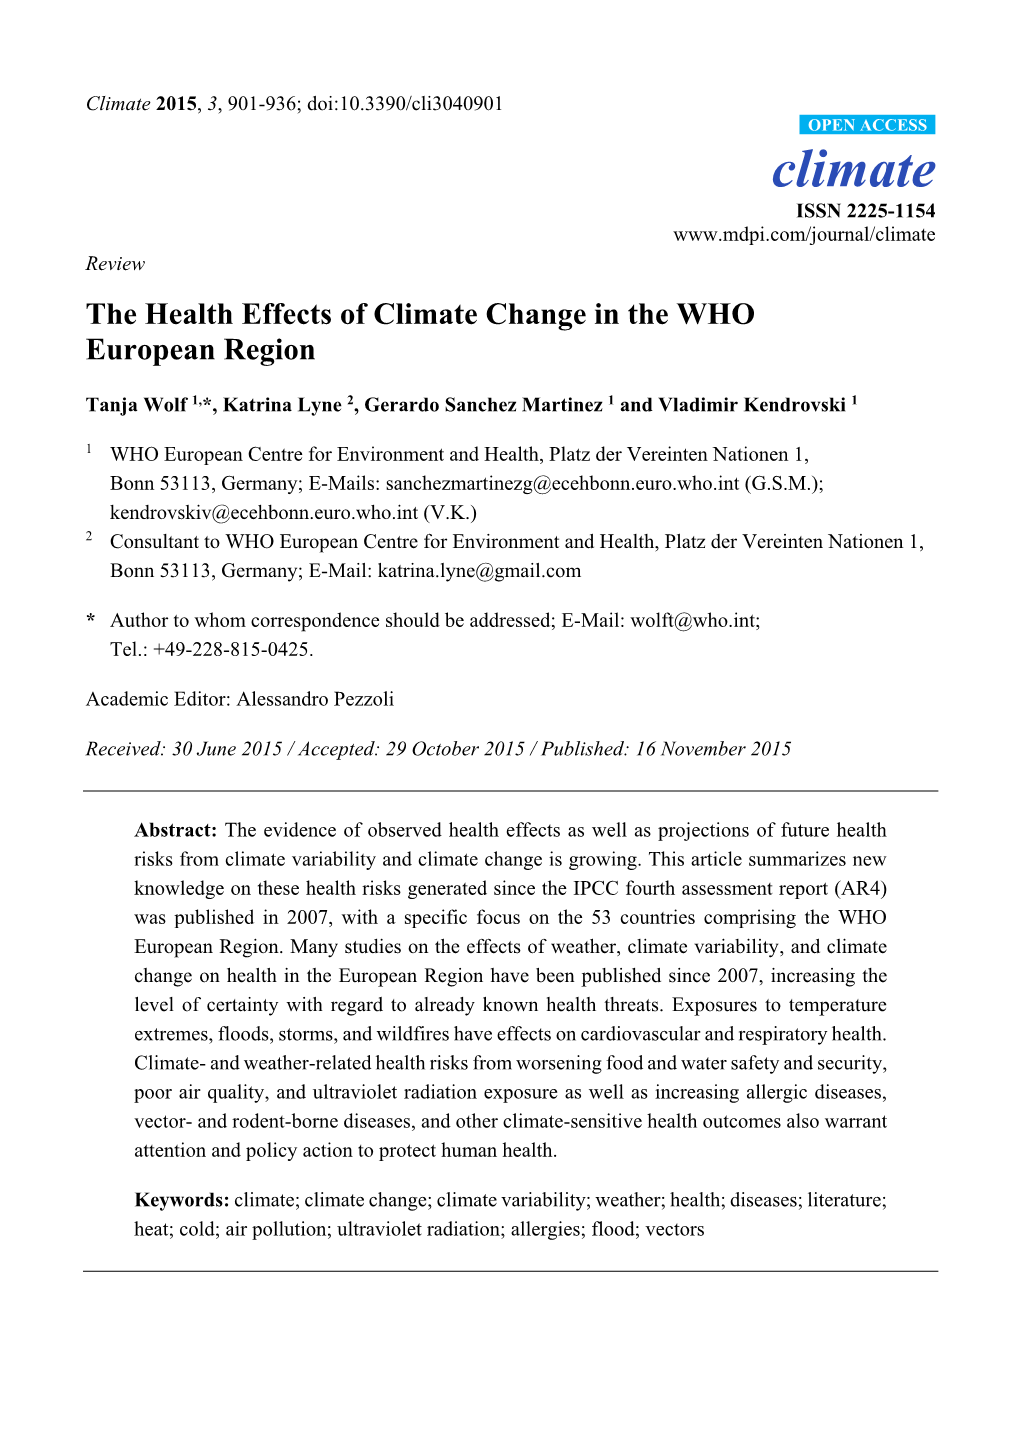 The Health Effects of Climate Change in the WHO European Region